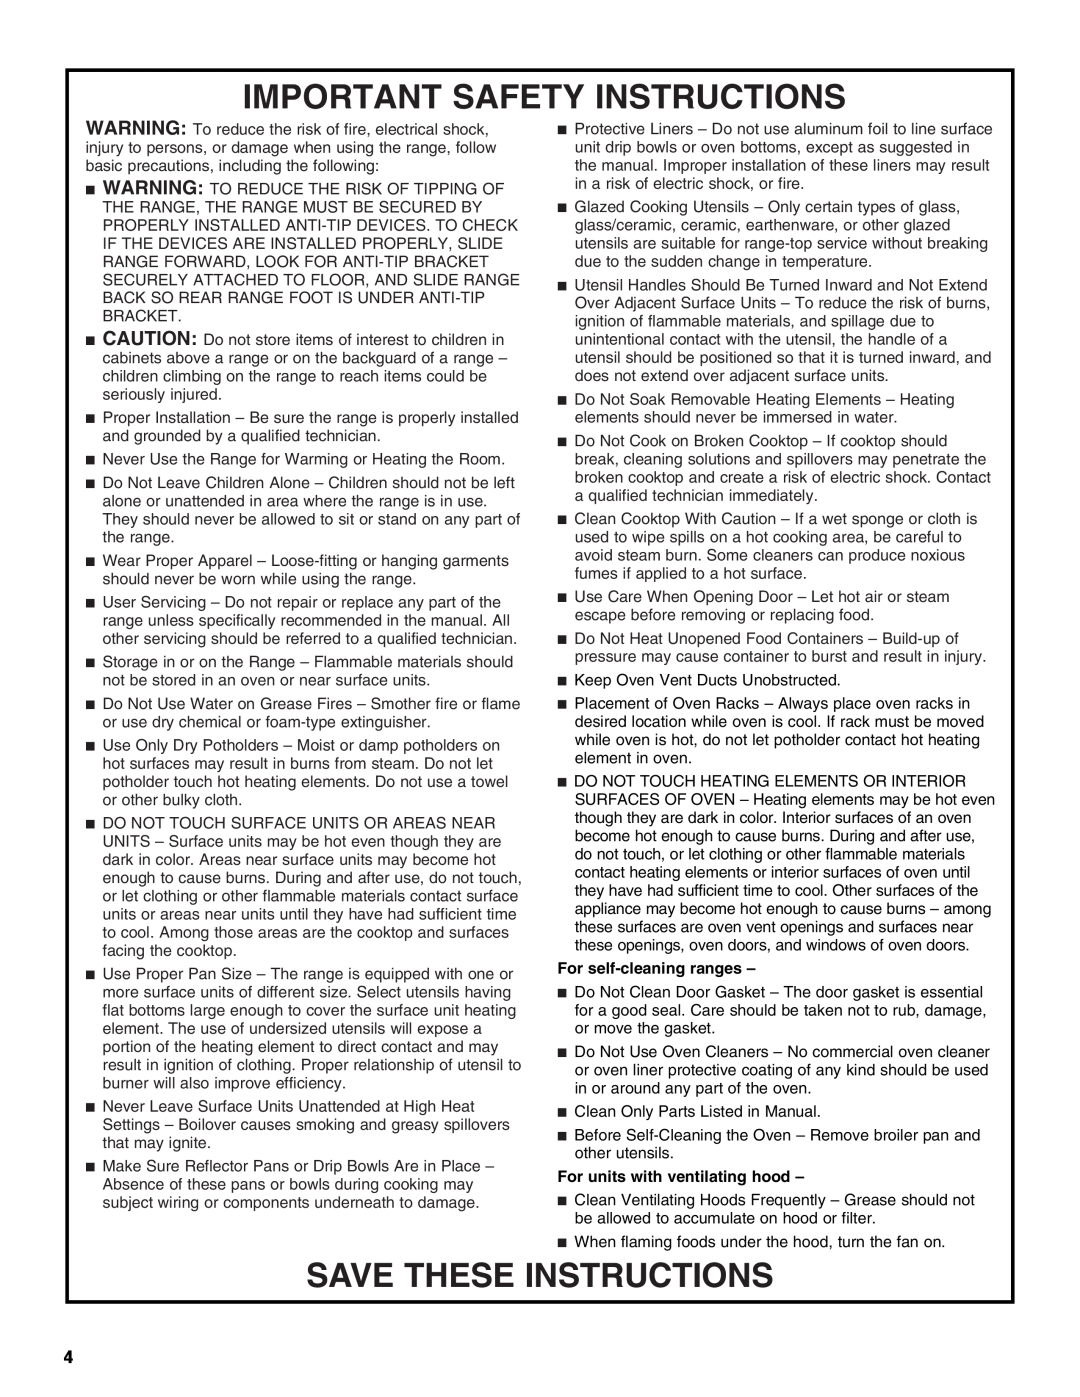 Whirlpool YIES366RS0 manual Important Safety Instructions, Save These Instructions, For self-cleaningranges 